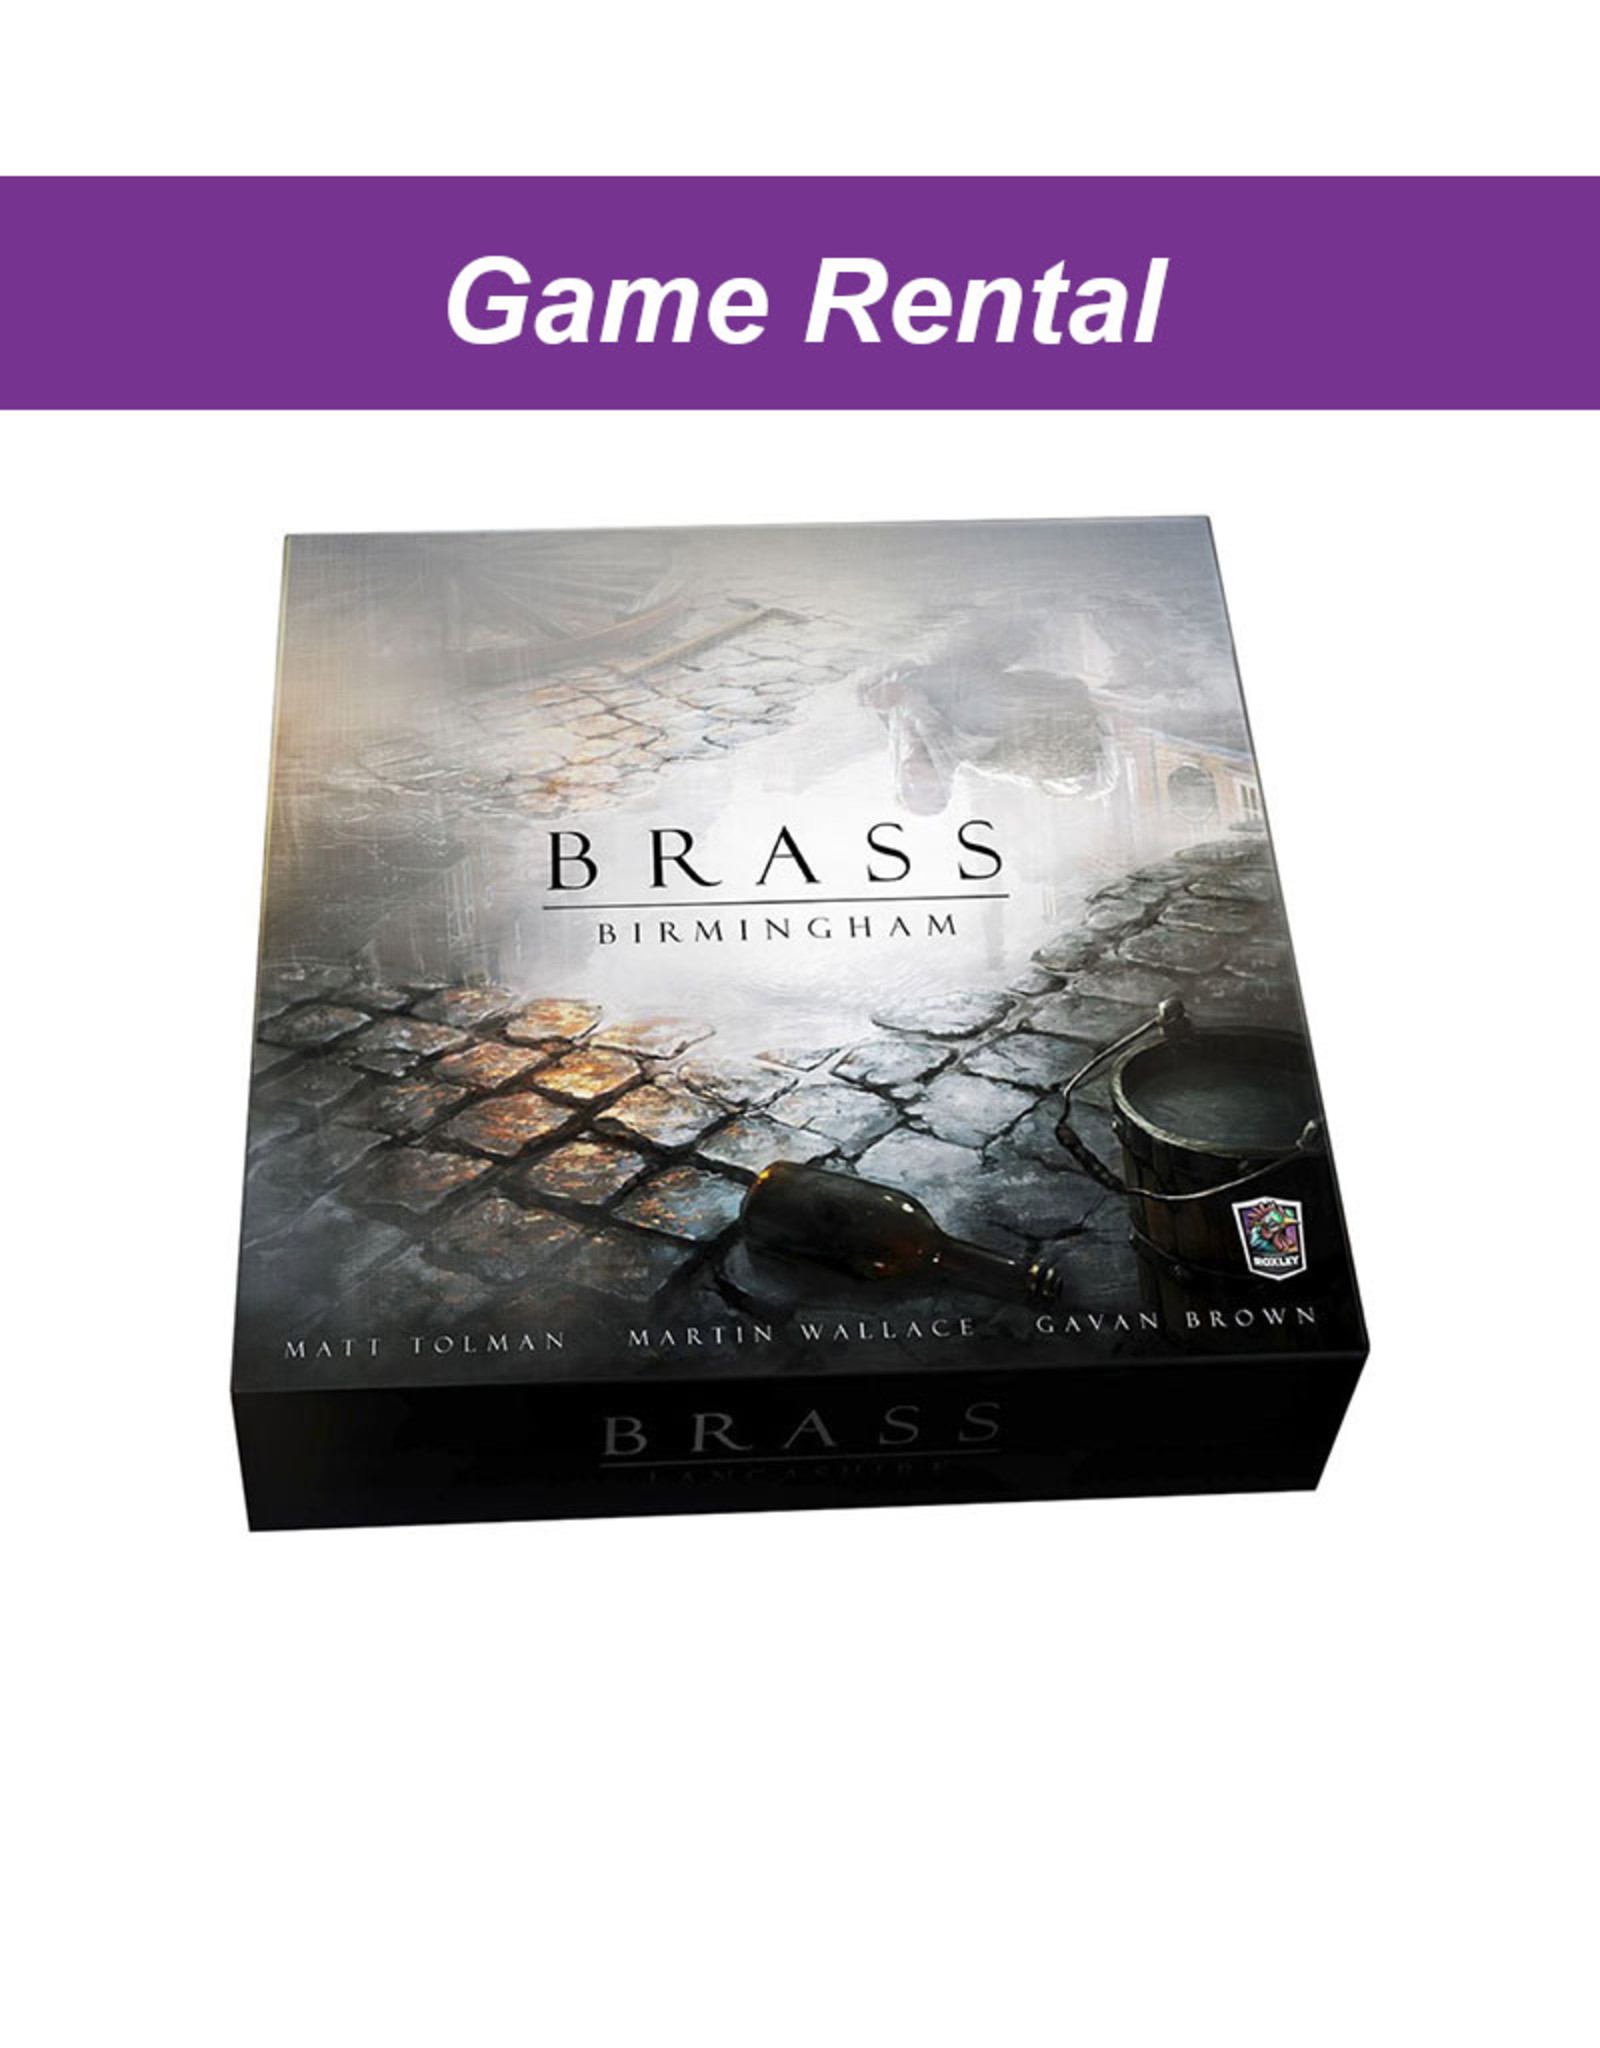 Roxley Games (RENT) Brass: Birmingham for a Day.  Love it! Buy it!